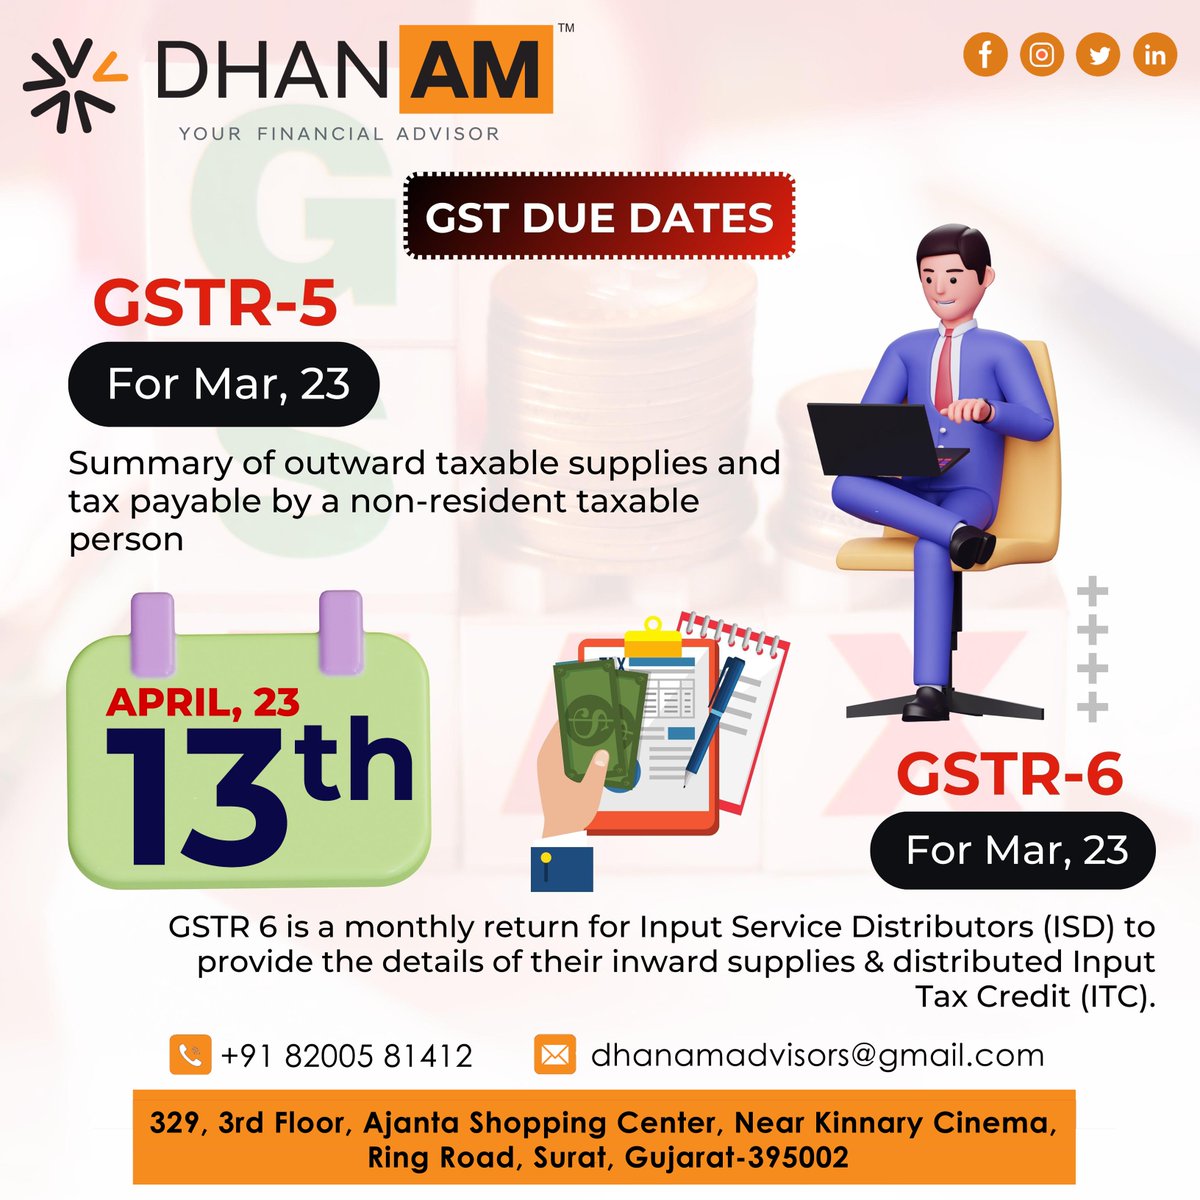 GSTR- 5 & GSTR -6 Due Date..

.

.

.

#gstduedate #gst #GovernmentOffice #TaxPayment #IncomeTax #Finance #Revenue #Compliance #Taxation #Filing #Accounting #WithholdingTax #TaxReturn #Business #CorporateTax #TaxLaw #FinancialManagement #Payroll #TaxCompliance #TaxationSystem